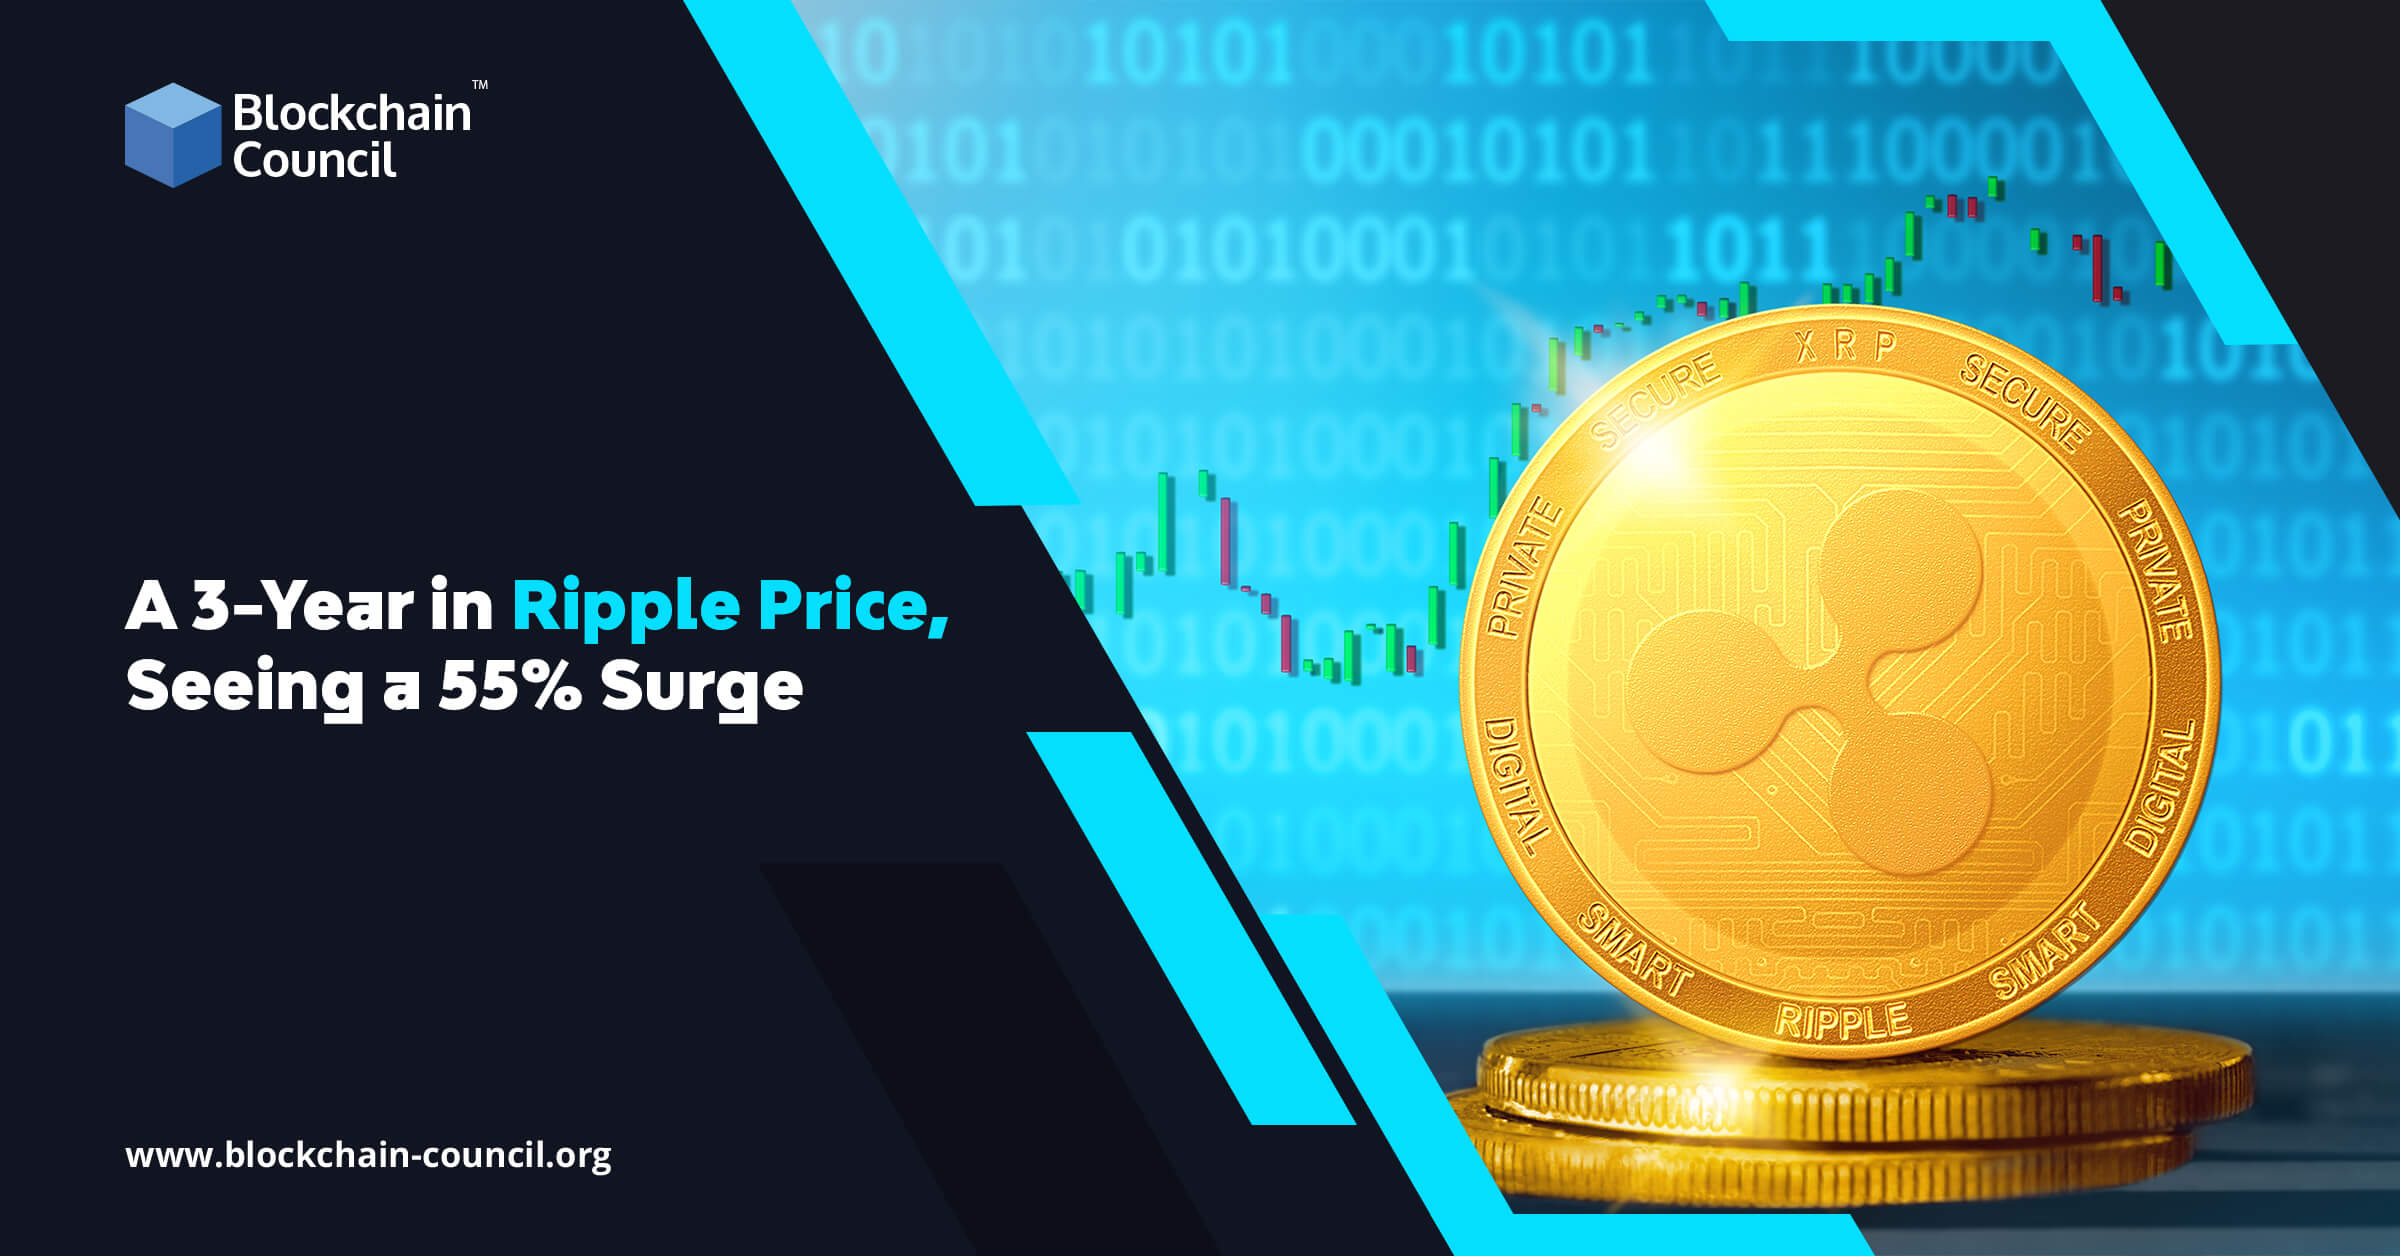 A 3-Year in Ripple Price, Seeing a 55% Surge